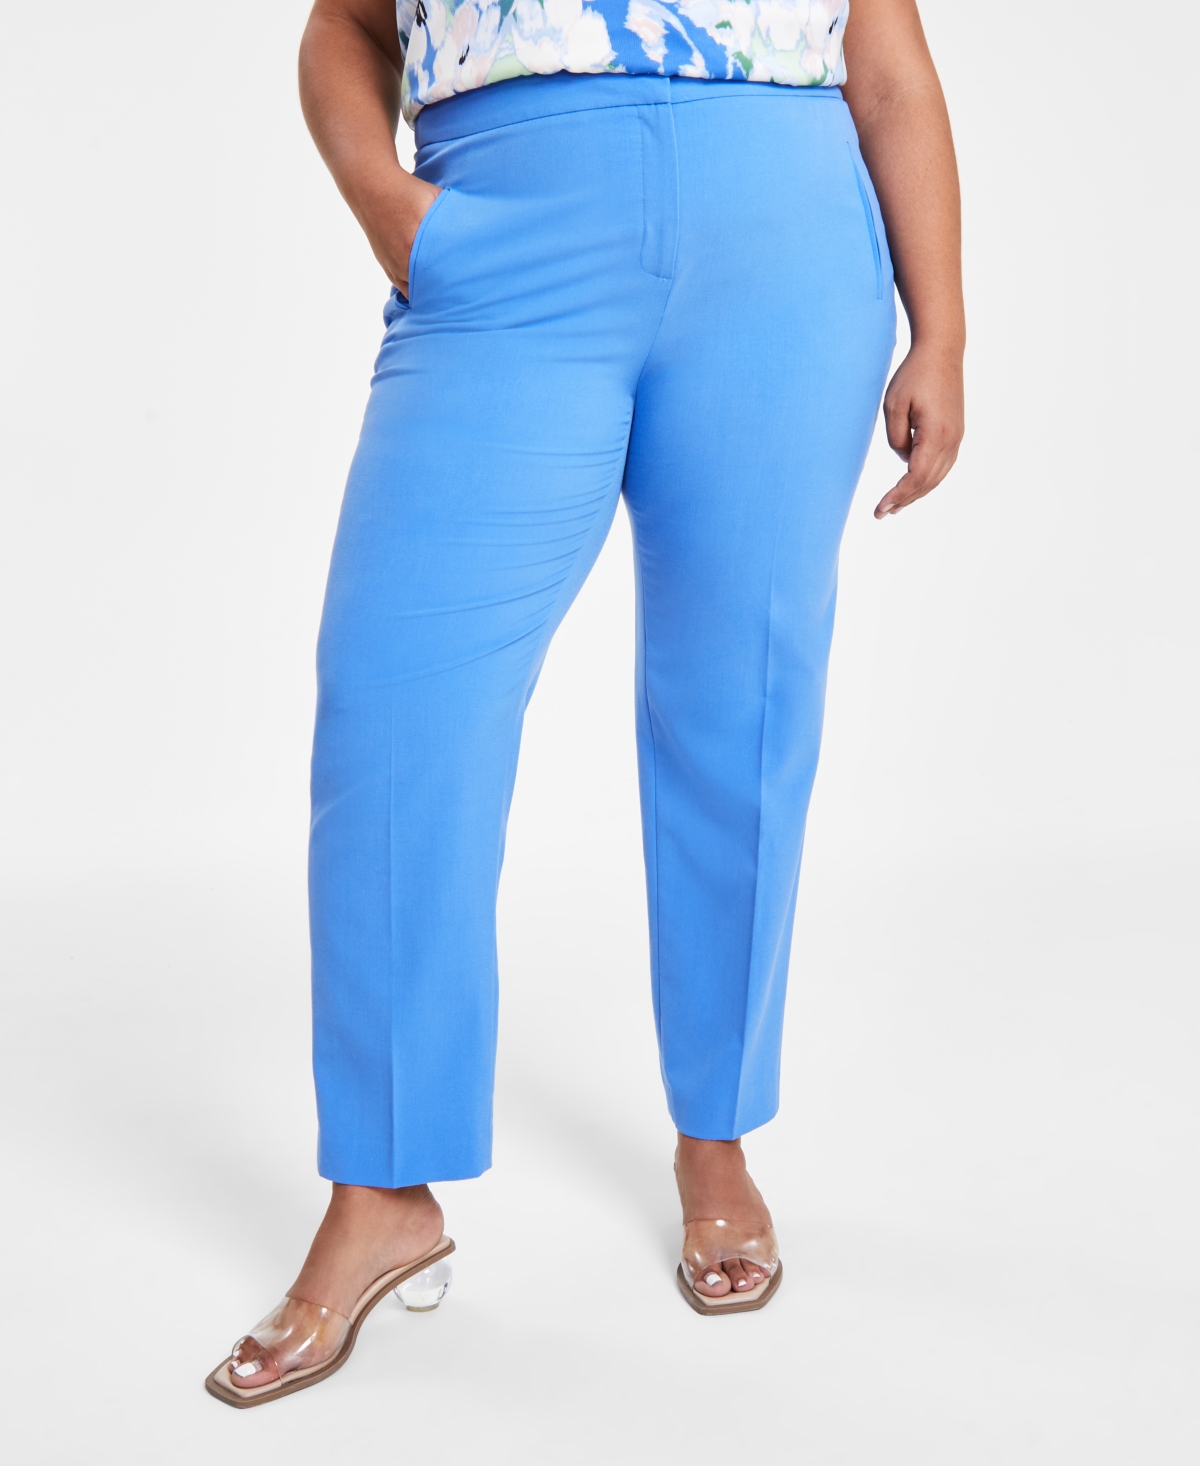 Bar Iii Plus Size Mid-rise Straight-leg Pants, Created For Macy's In Delft Blue